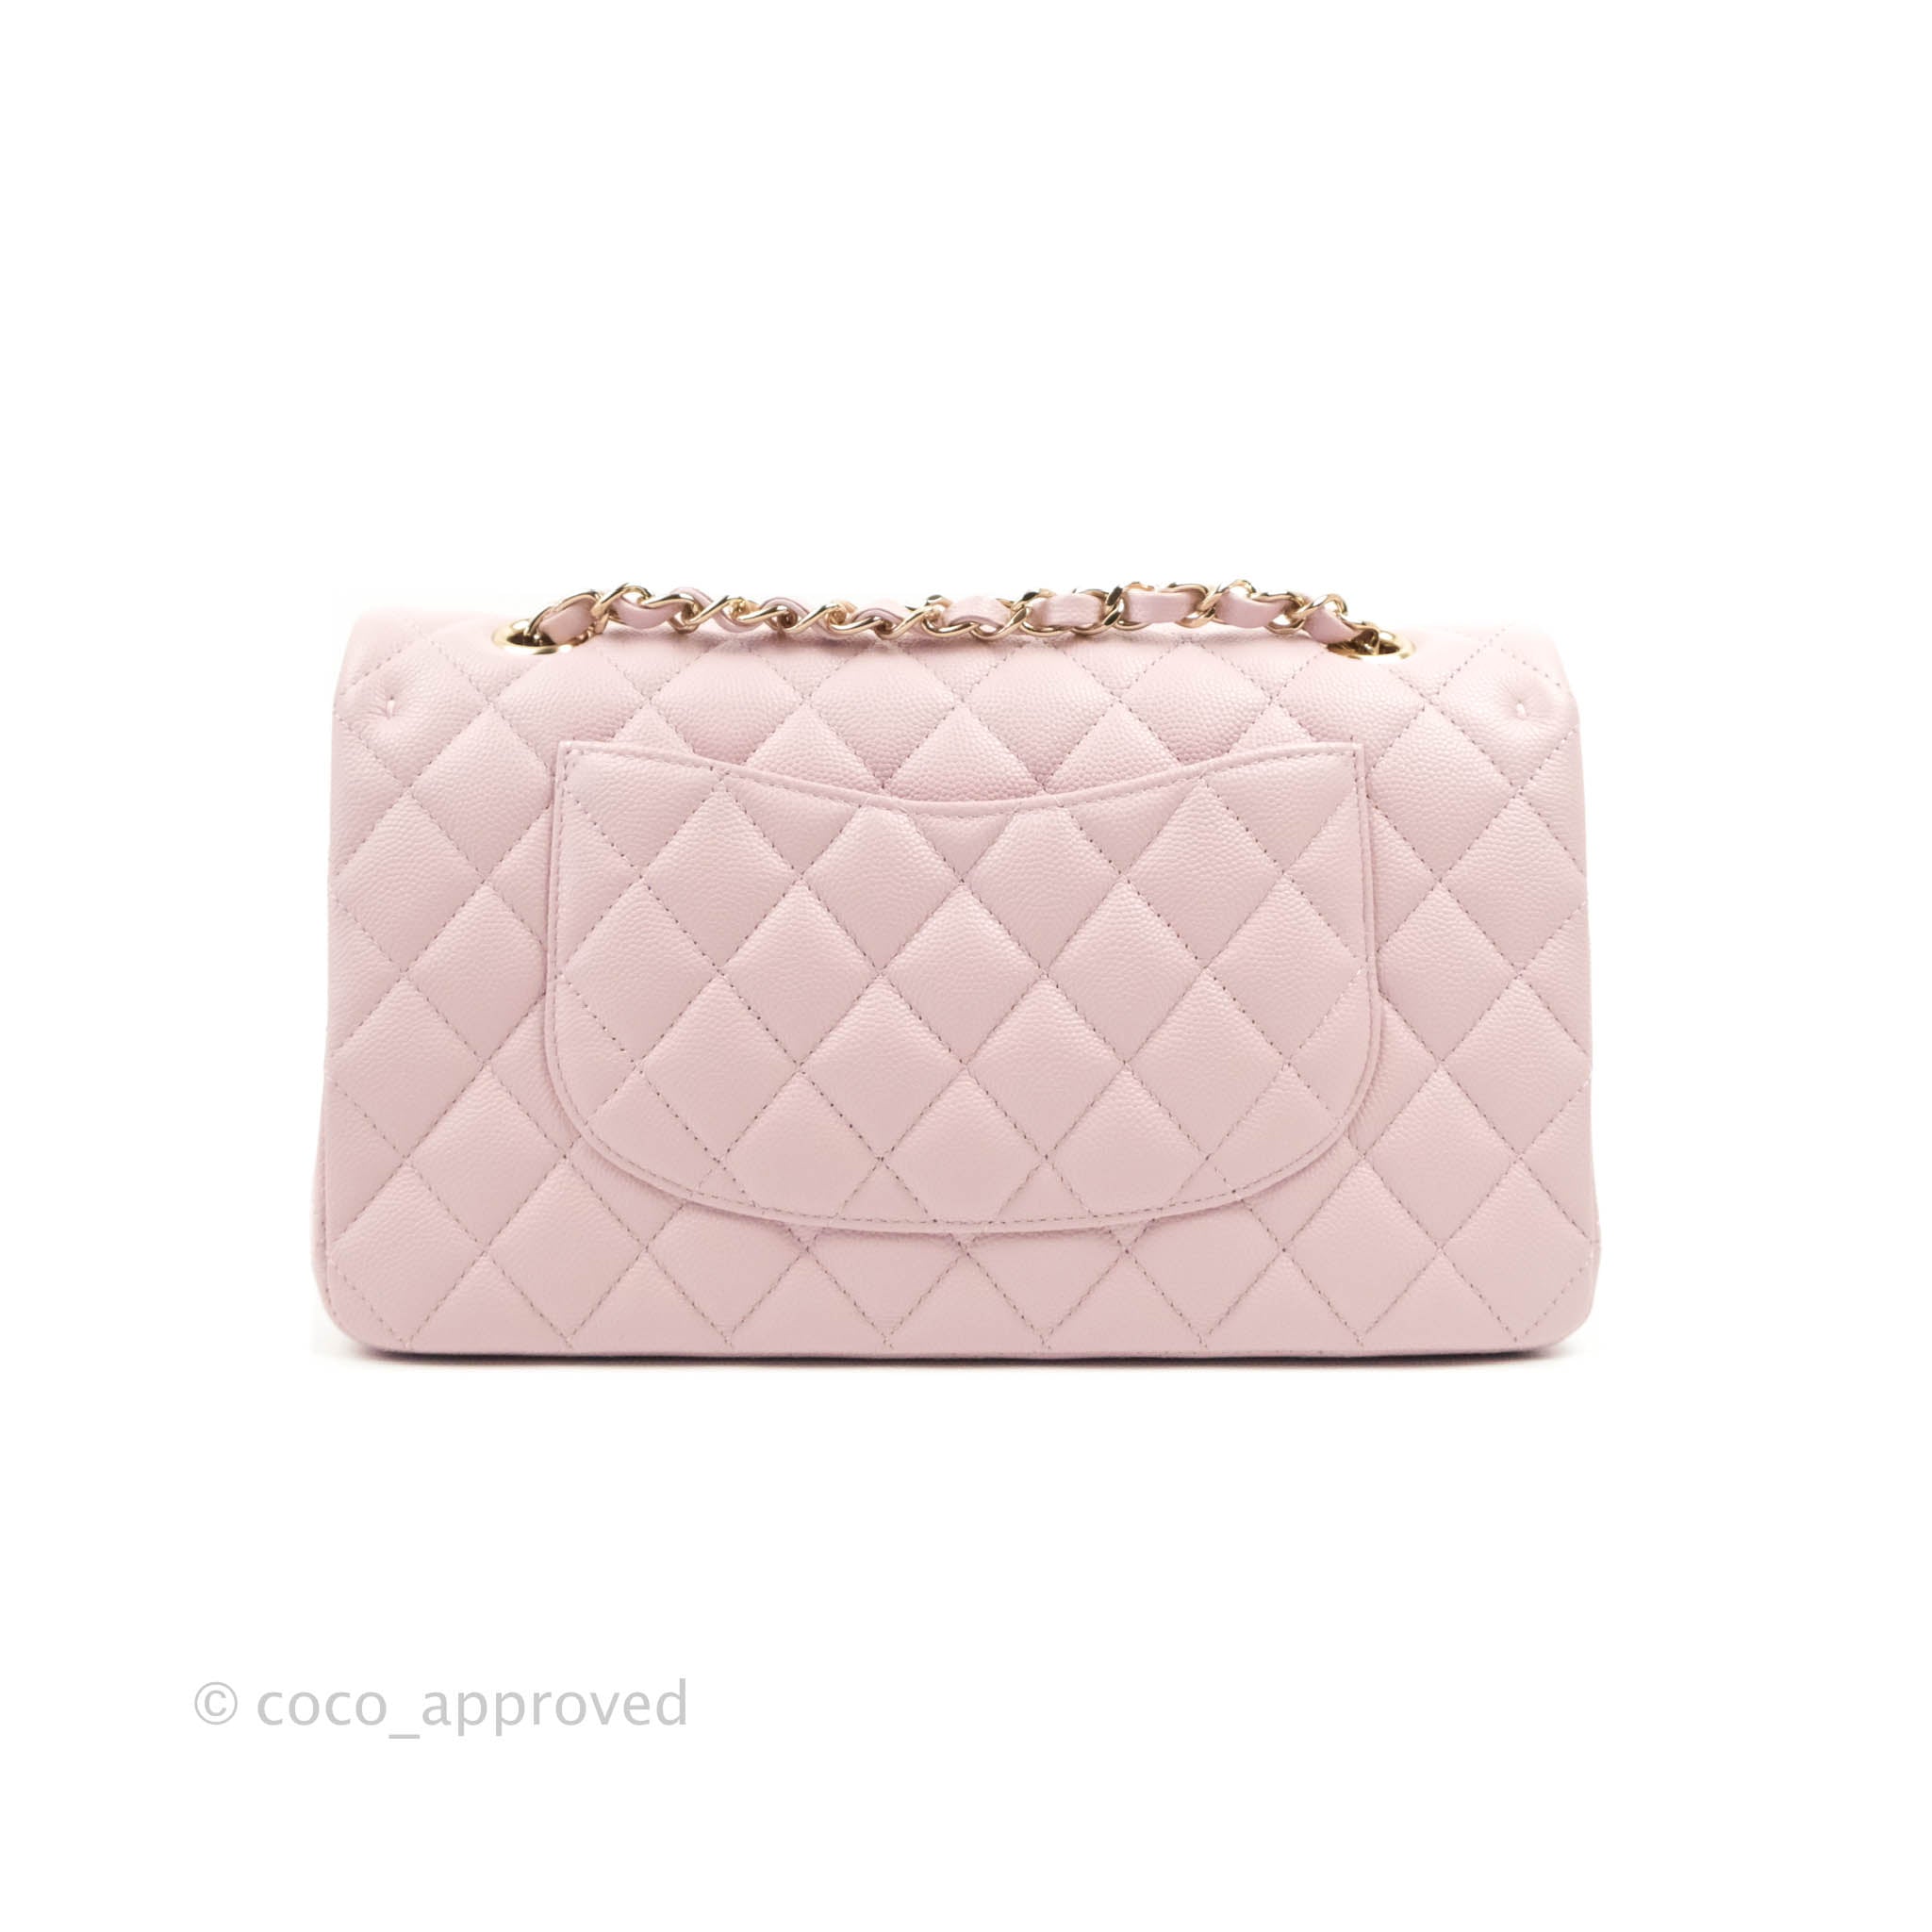 CHANEL, Bags, Chanel Pink Double Flap Bag With Crocodile Print